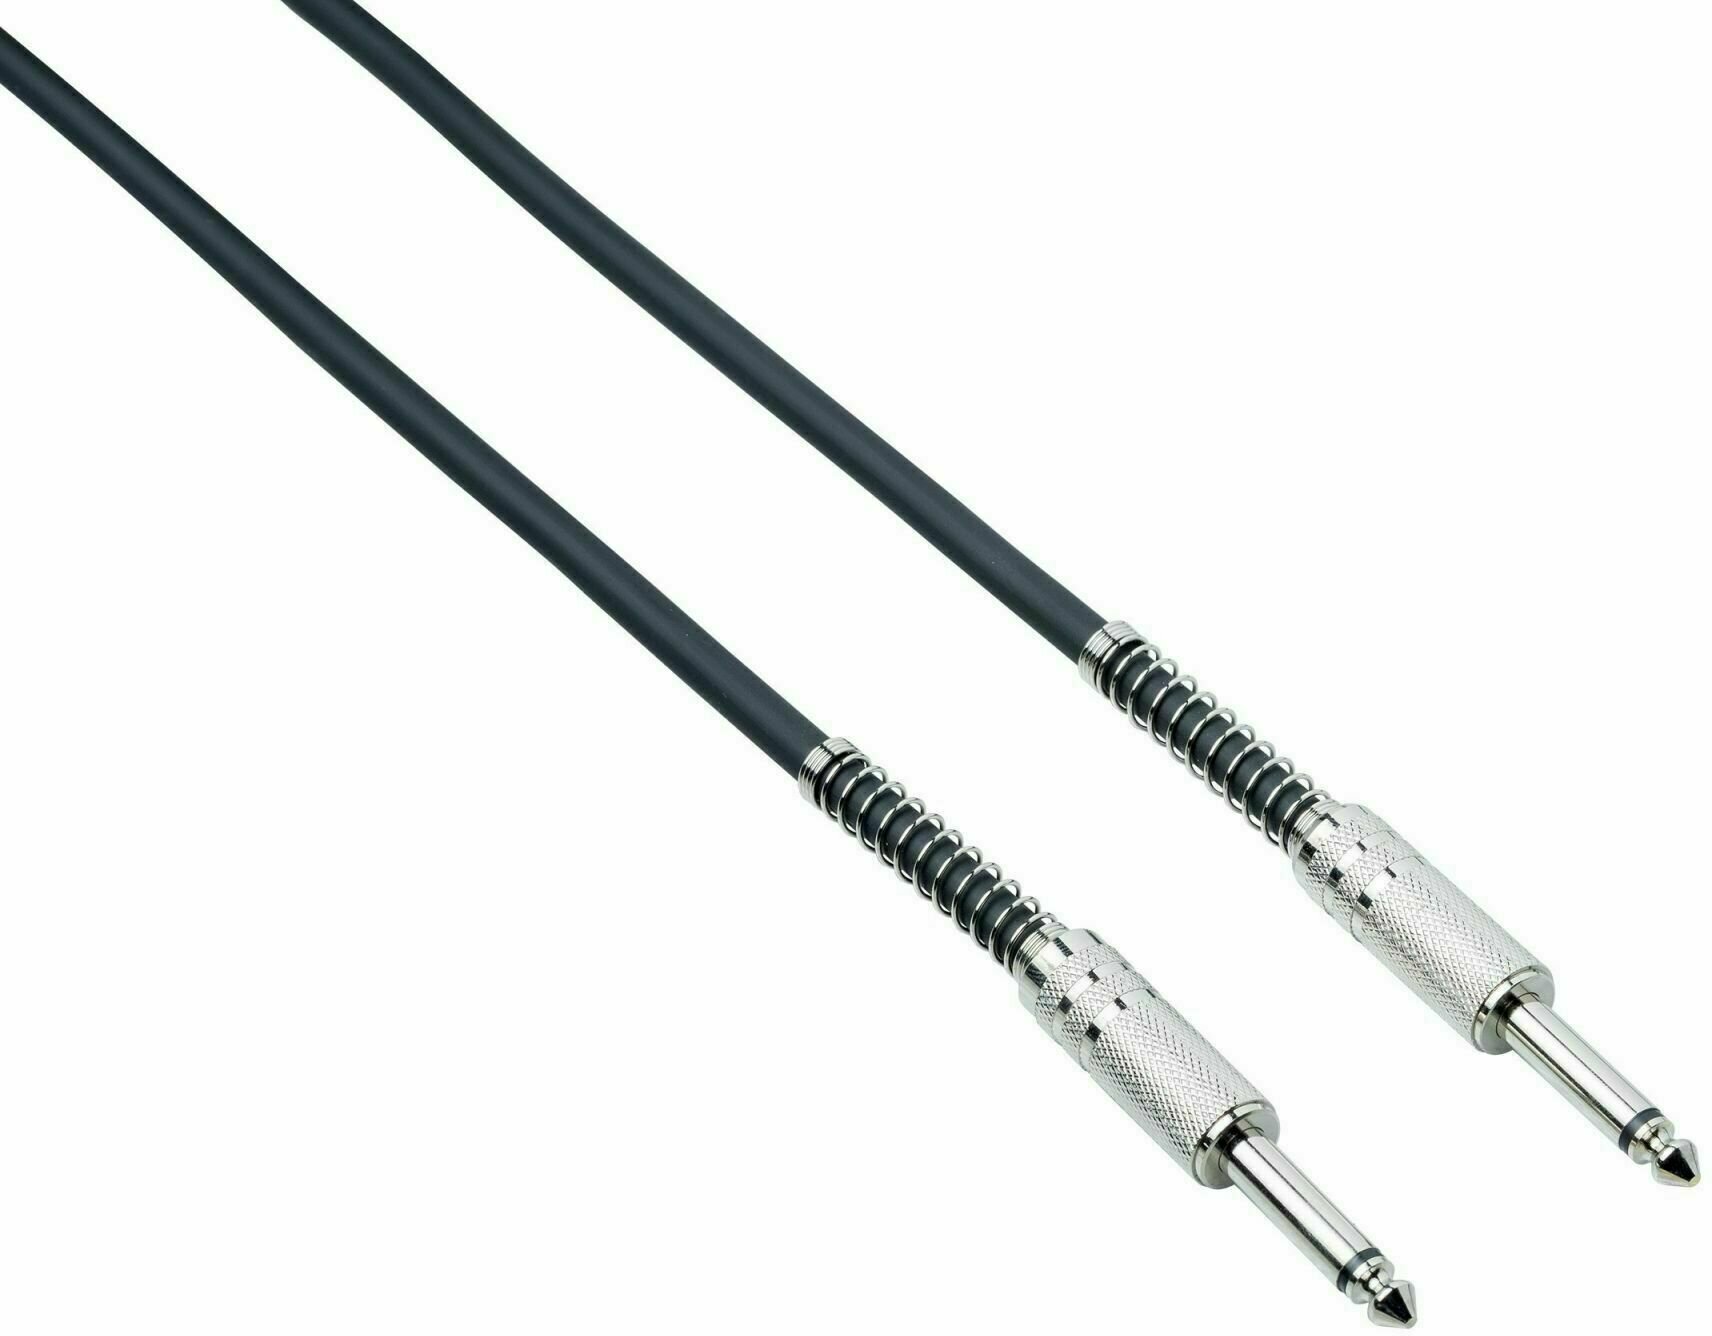 Adapter/Patch Cable Bespeco IRO 30 Black 30 cm Straight - Straight